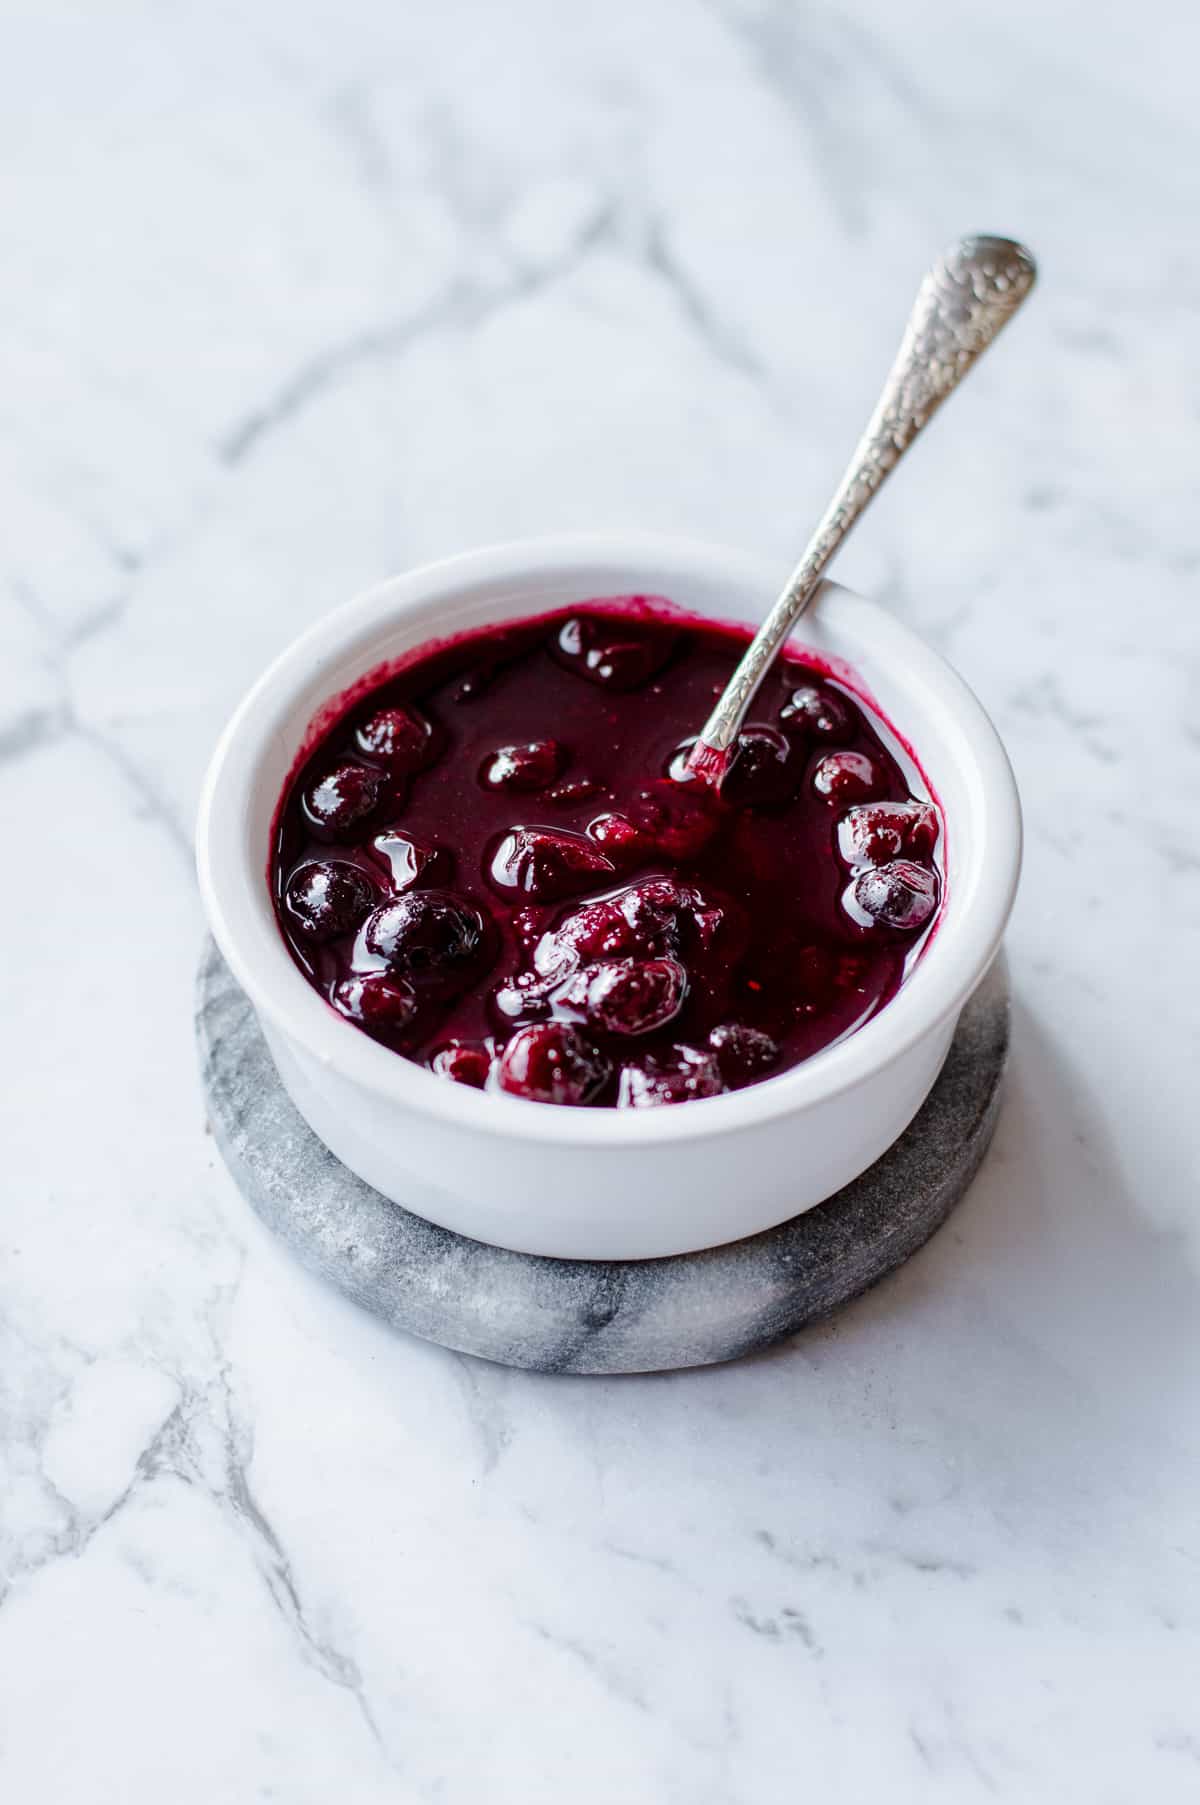 Thermomix Blueberry Compote